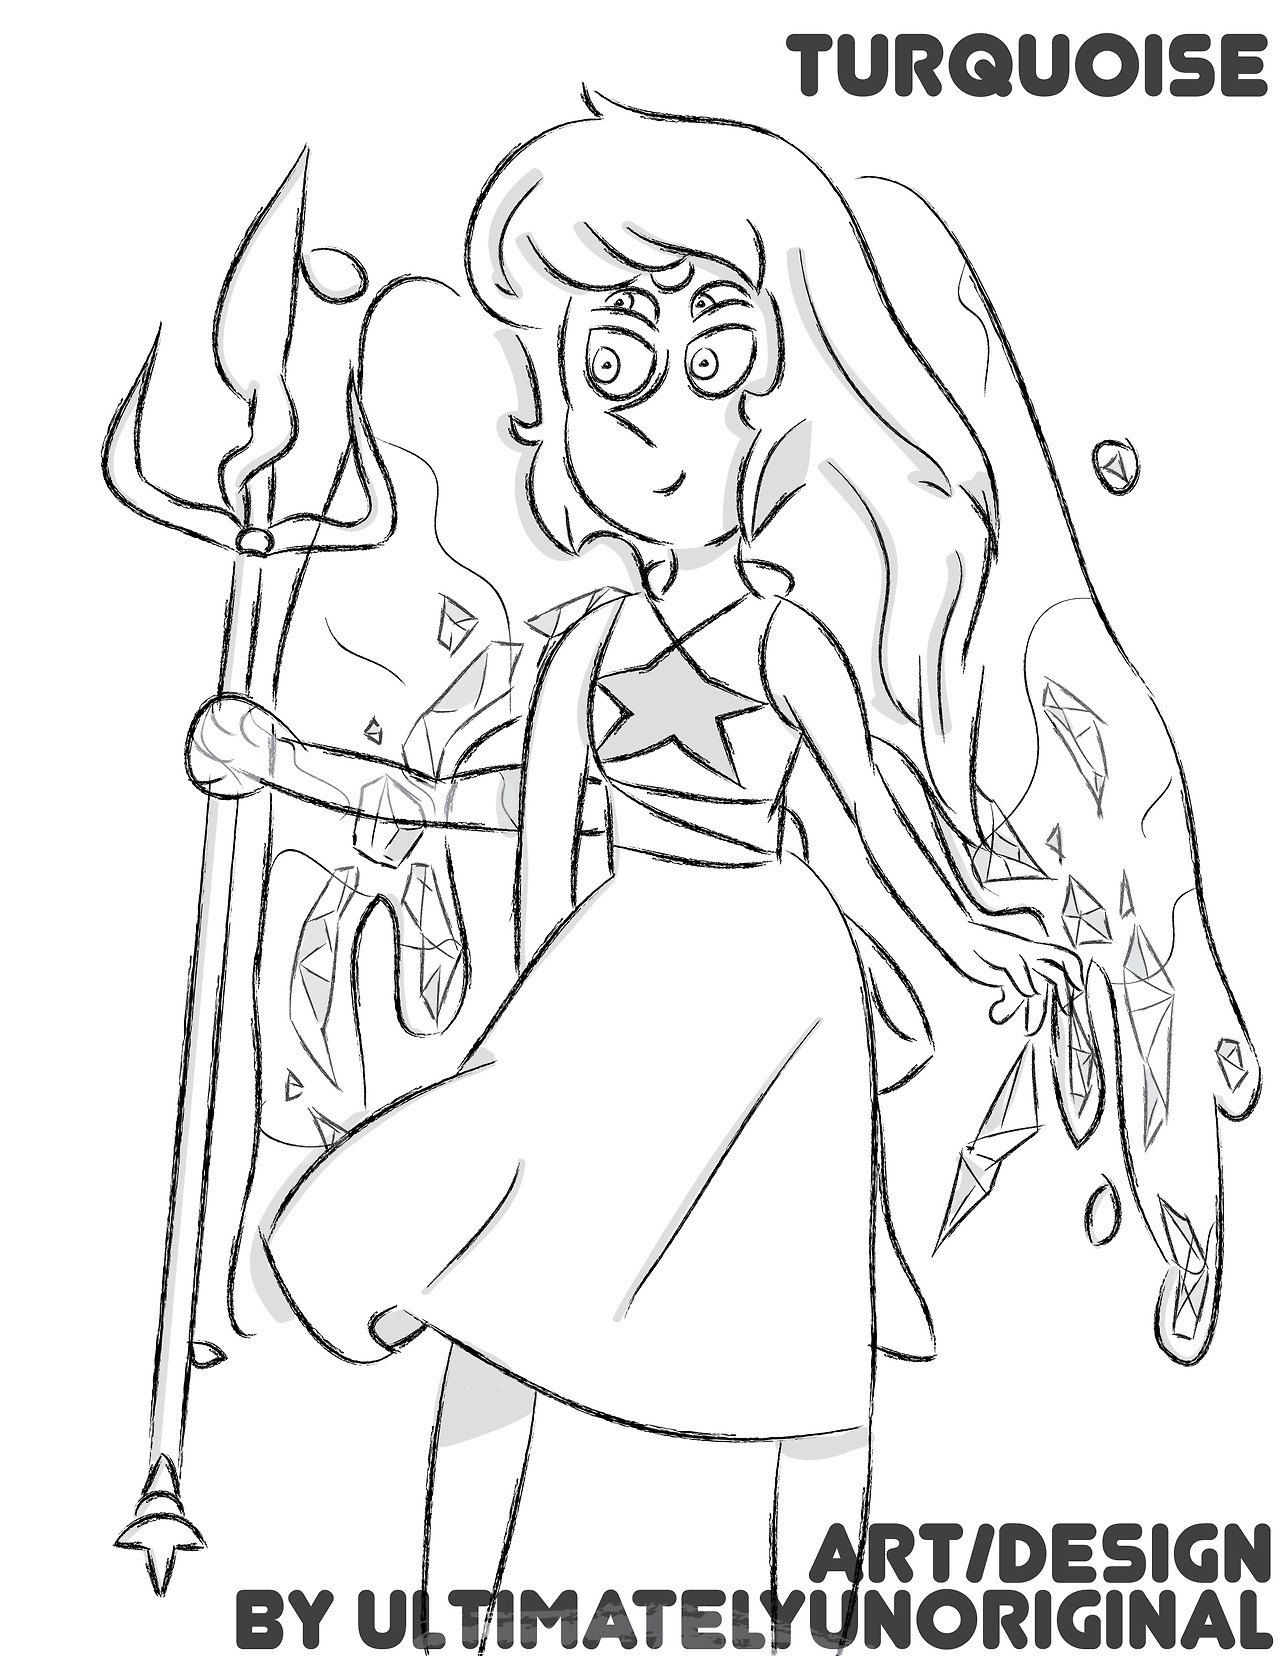 This drawing of my OC Turquoise (fusion of Pearl And Lapis) has prolly gotta be the